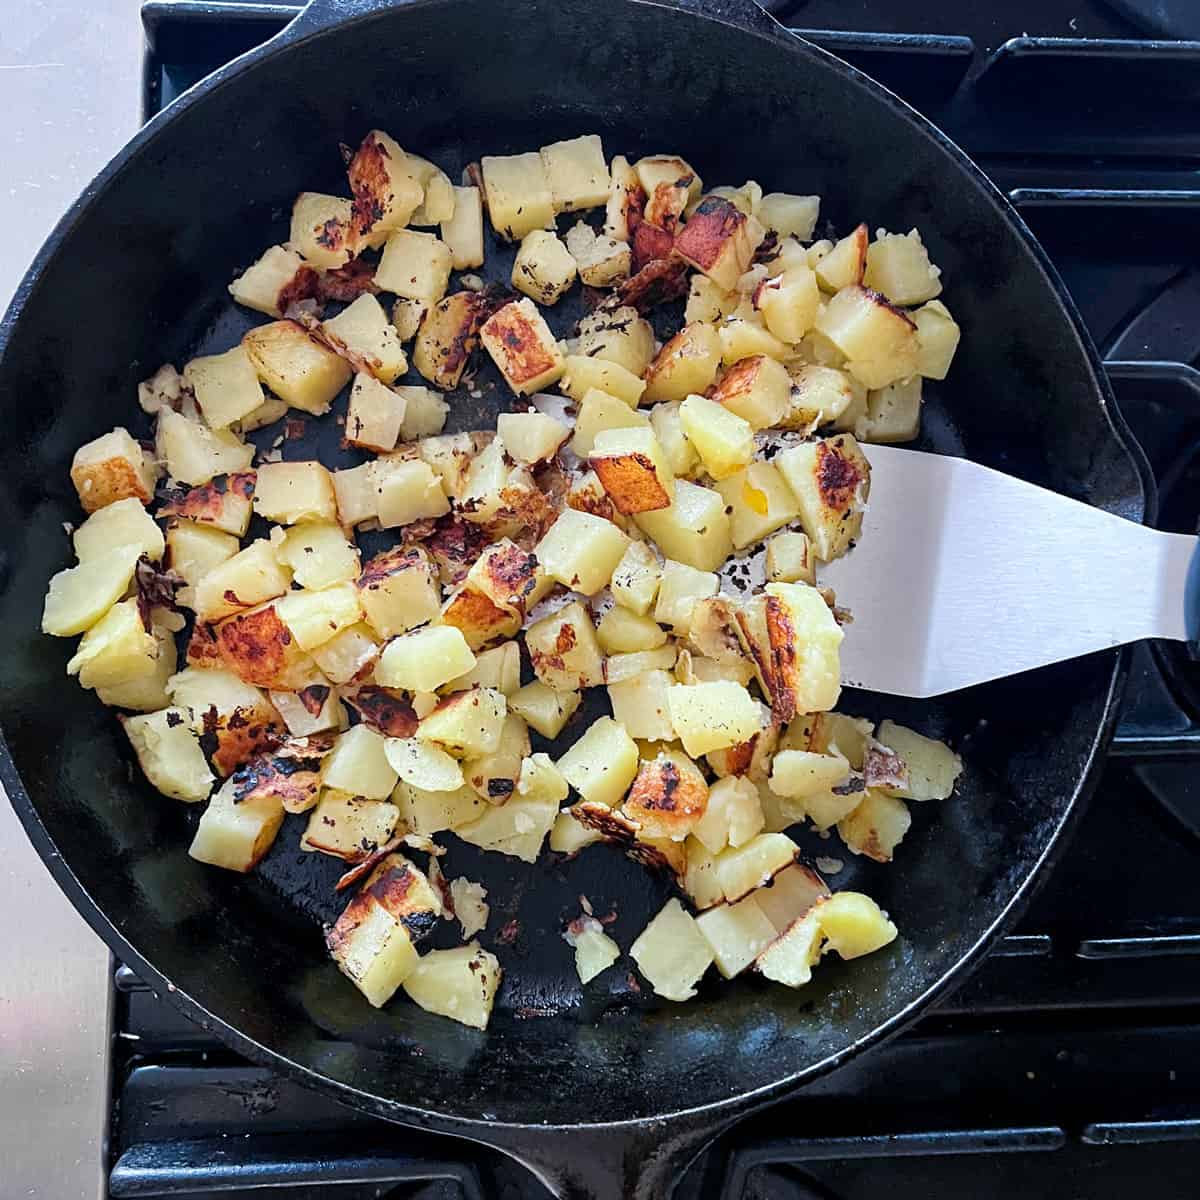 Cubed potatoes crisping and browning in a cast iron skillet with a metal spatula.